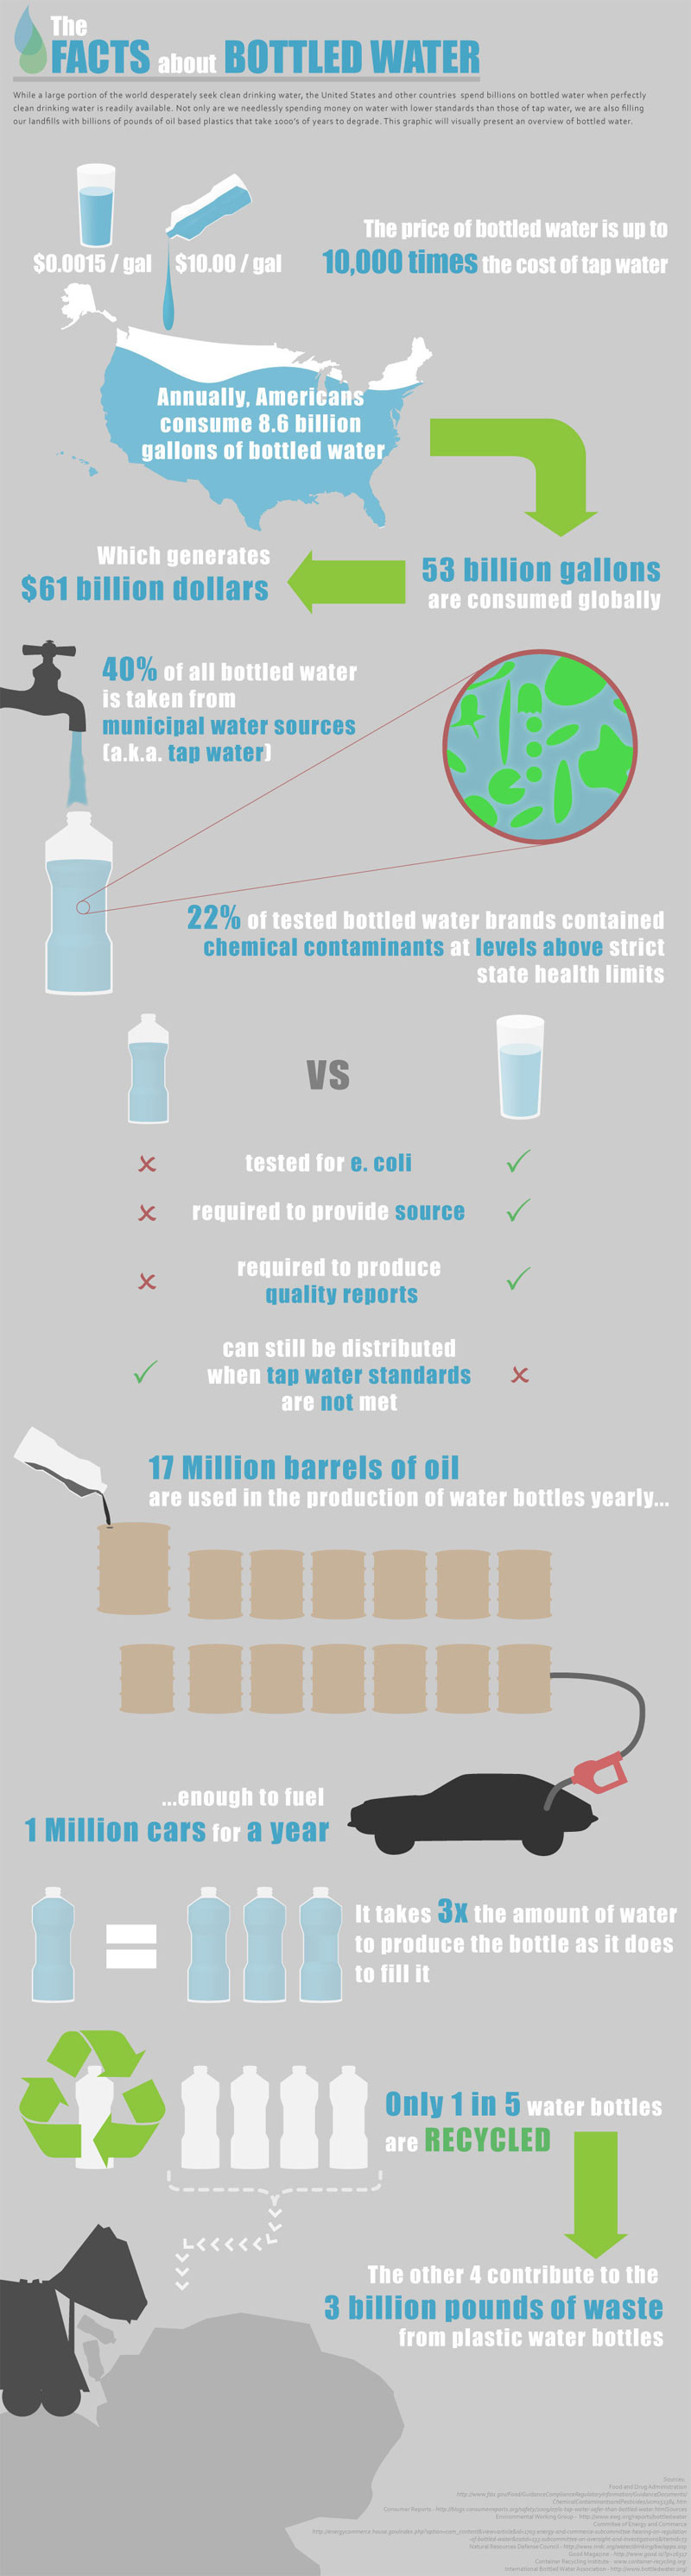 facts_about_bottled_water.jpg